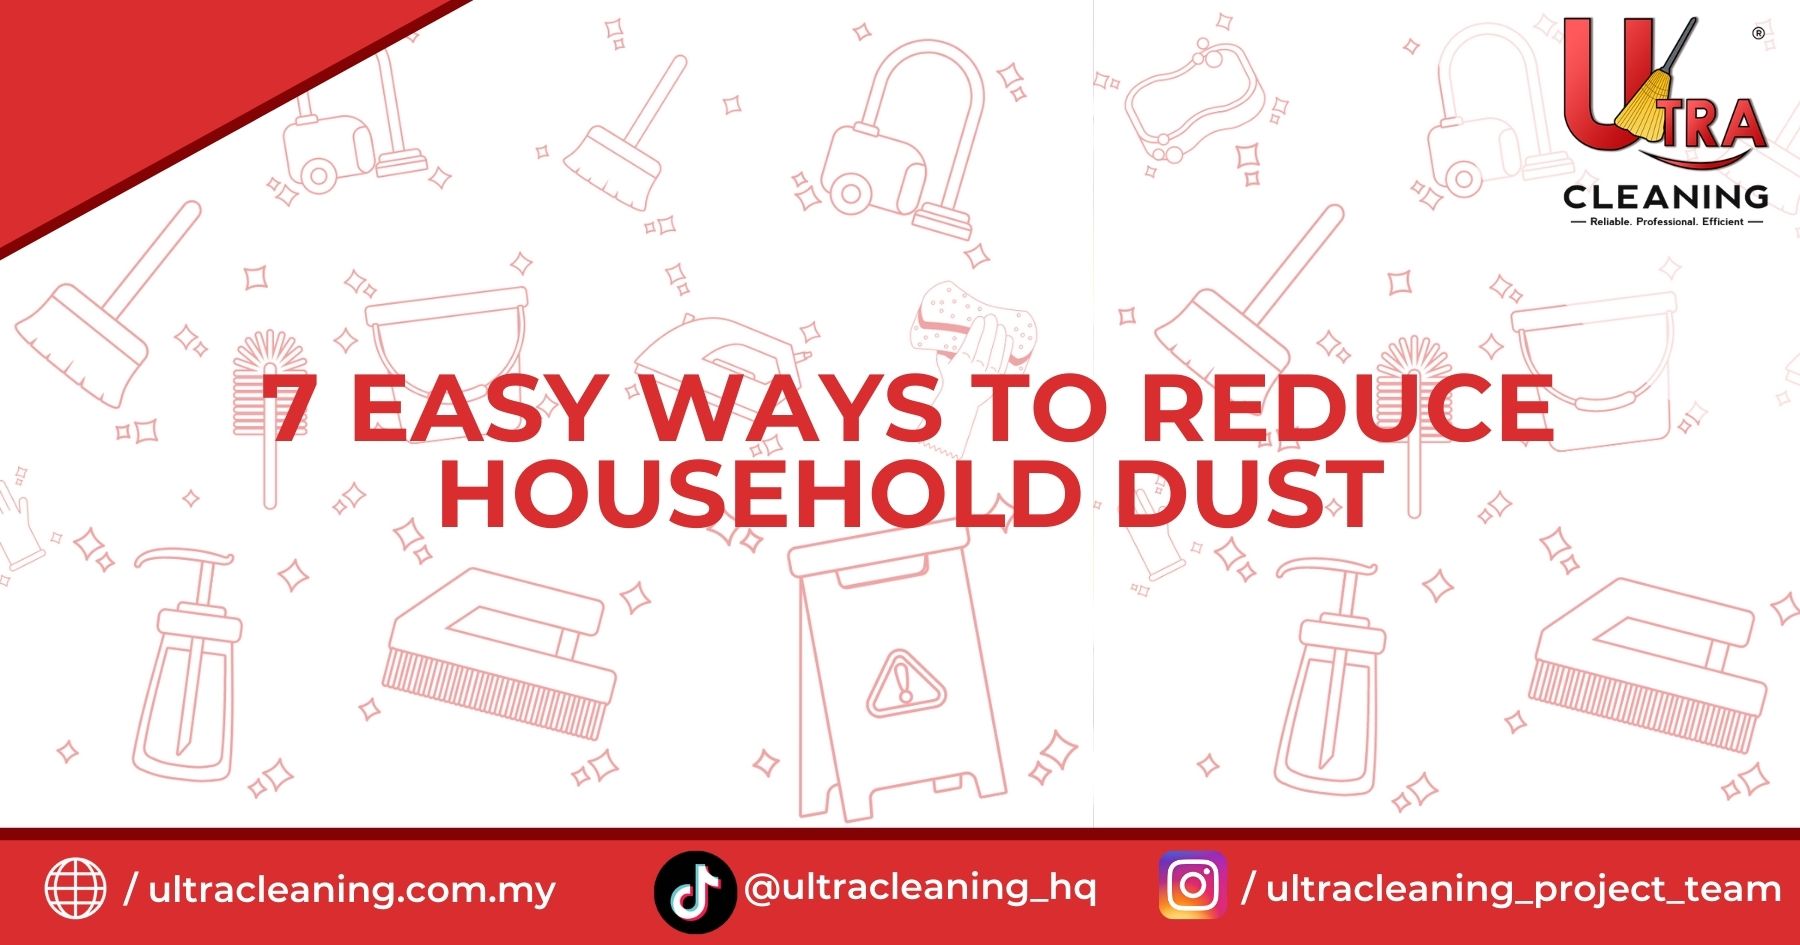 7 Easy Ways to Reduce Household Dust